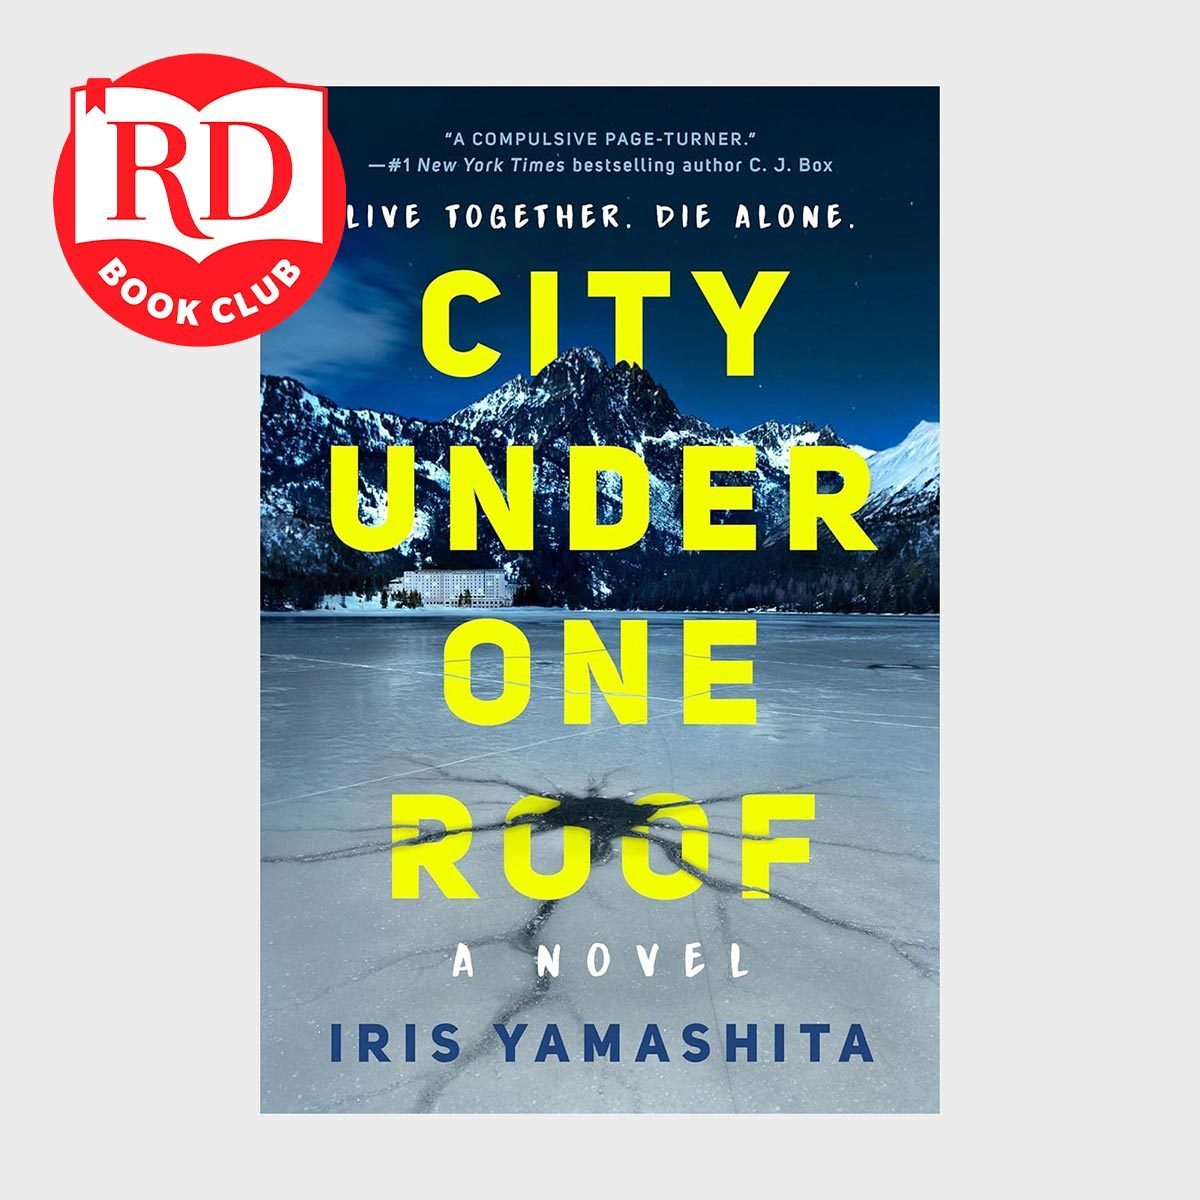 Book Club Pick City Under One Roof